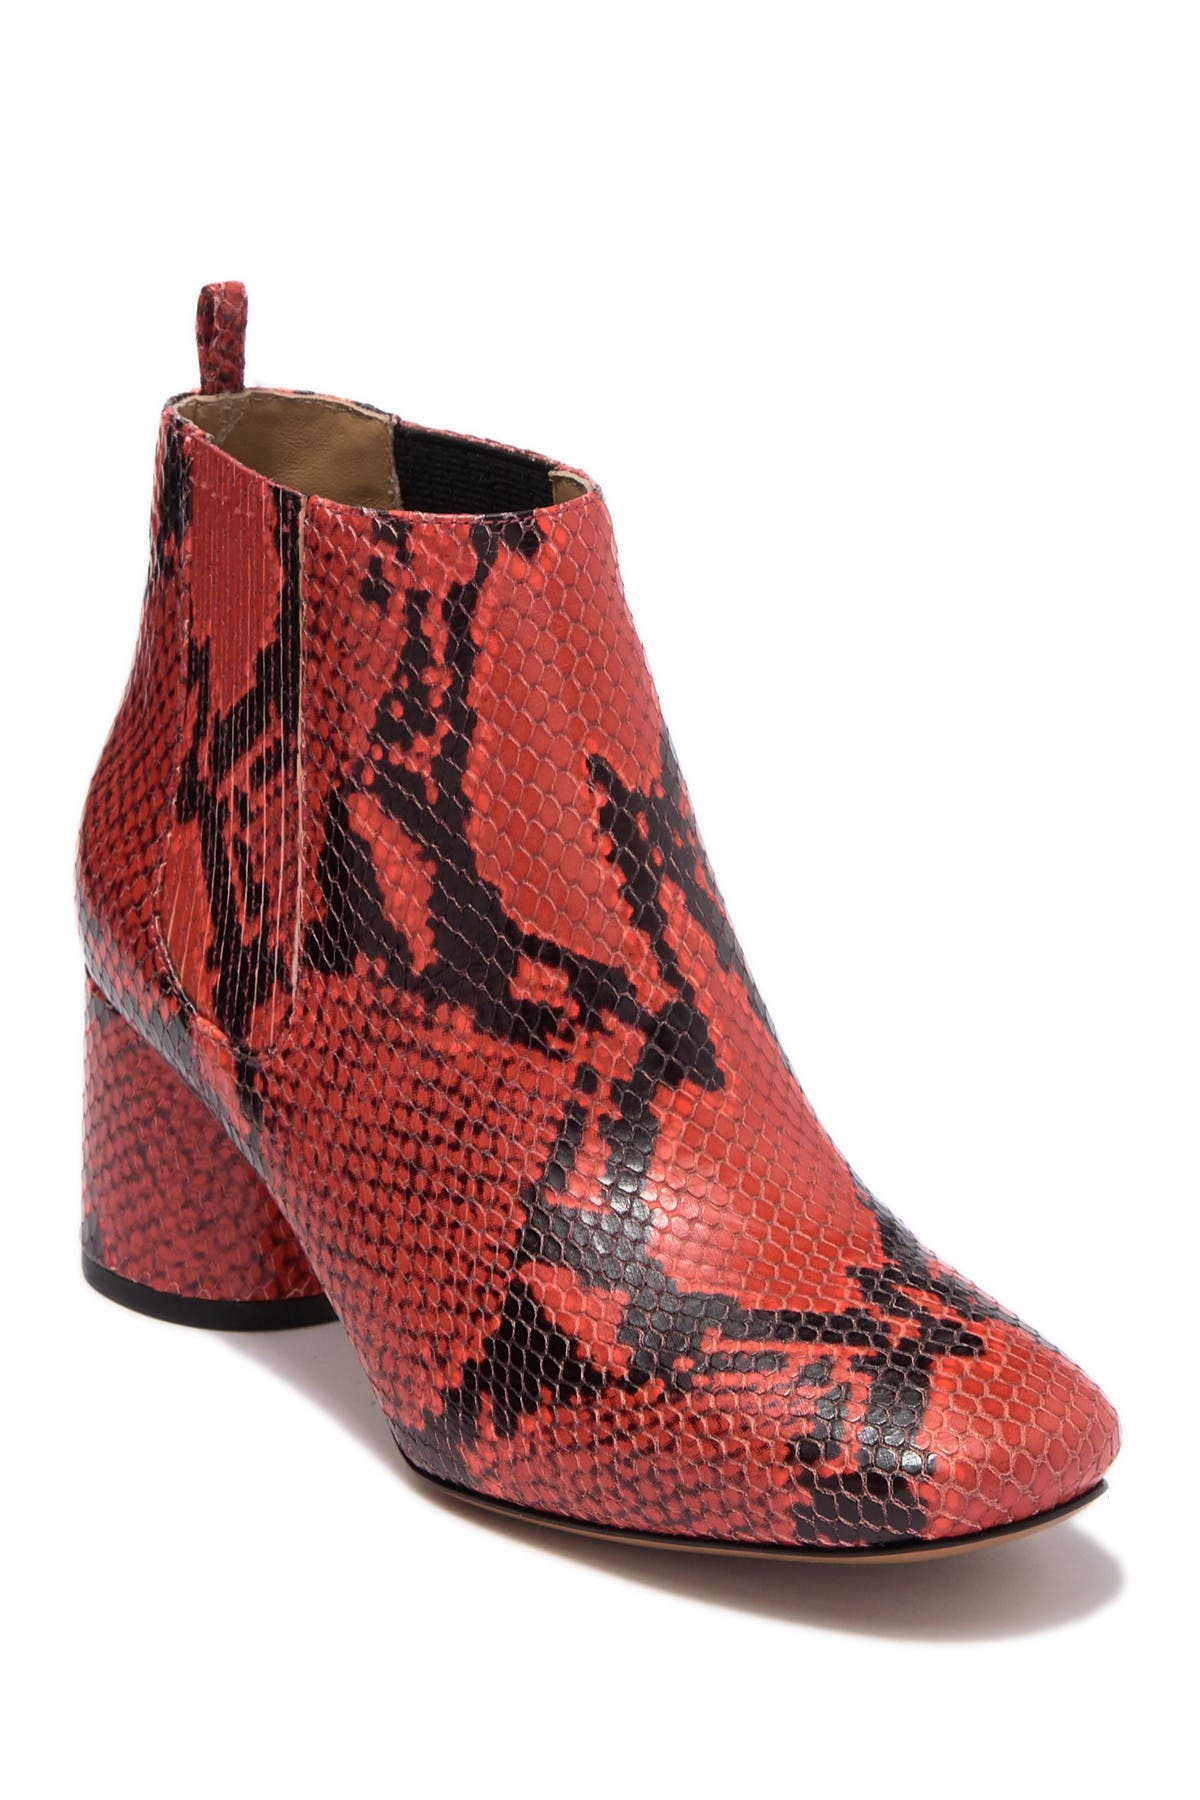 marc jacobs snake boots